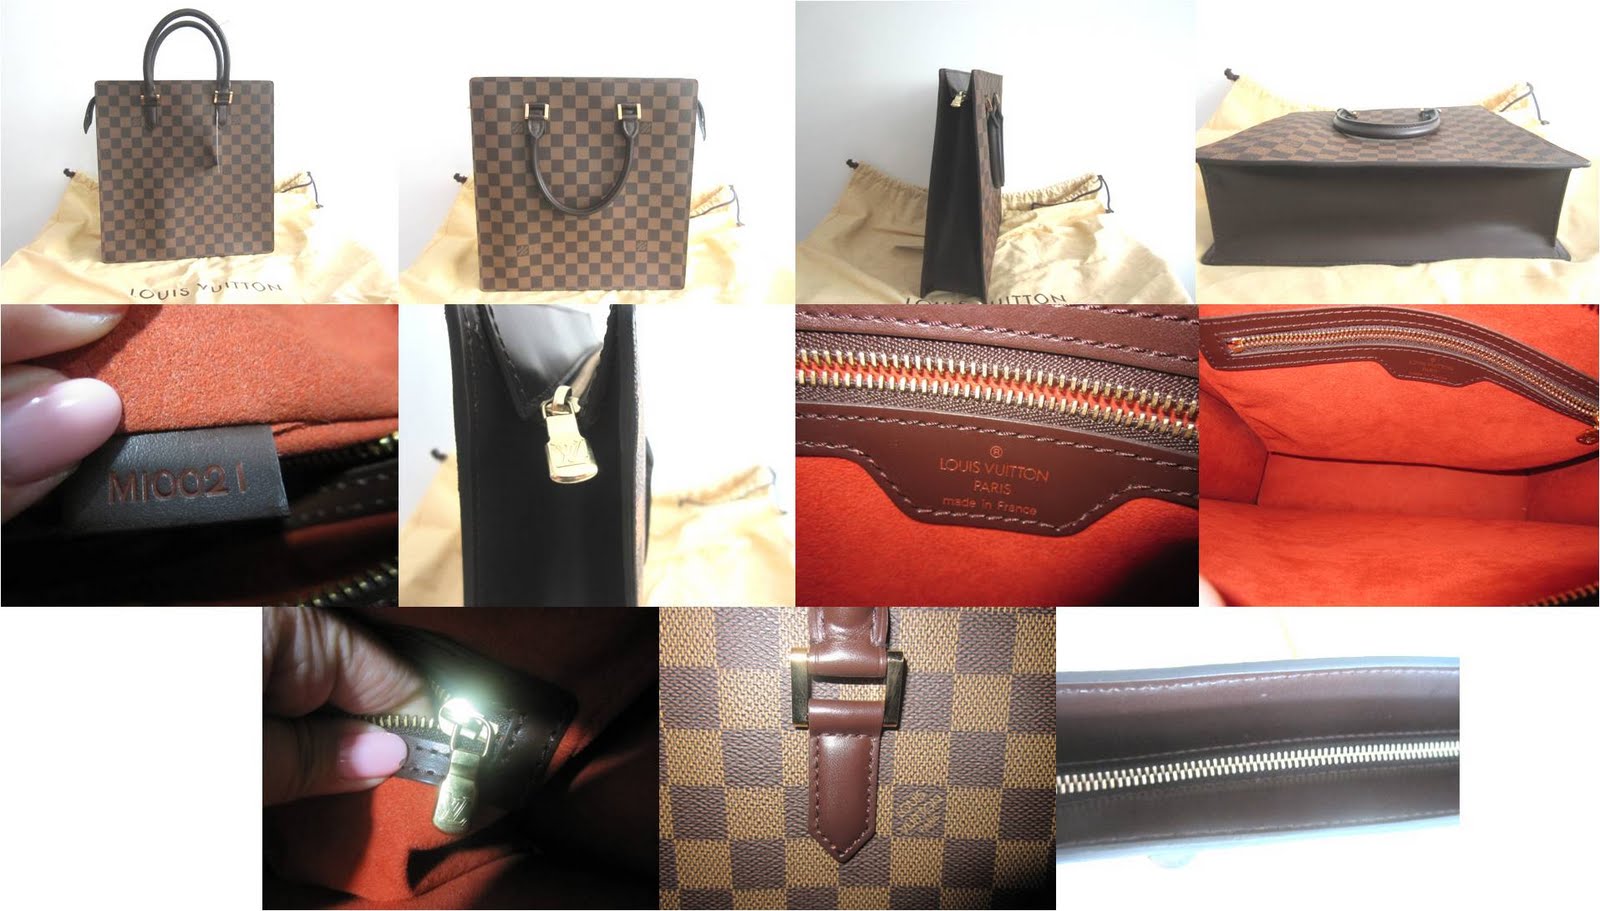 The Bags Affairs ~ Satisfy your lust for designer bags: LOUIS VUITTON DAMIER EBENE VENICE (0911-08)